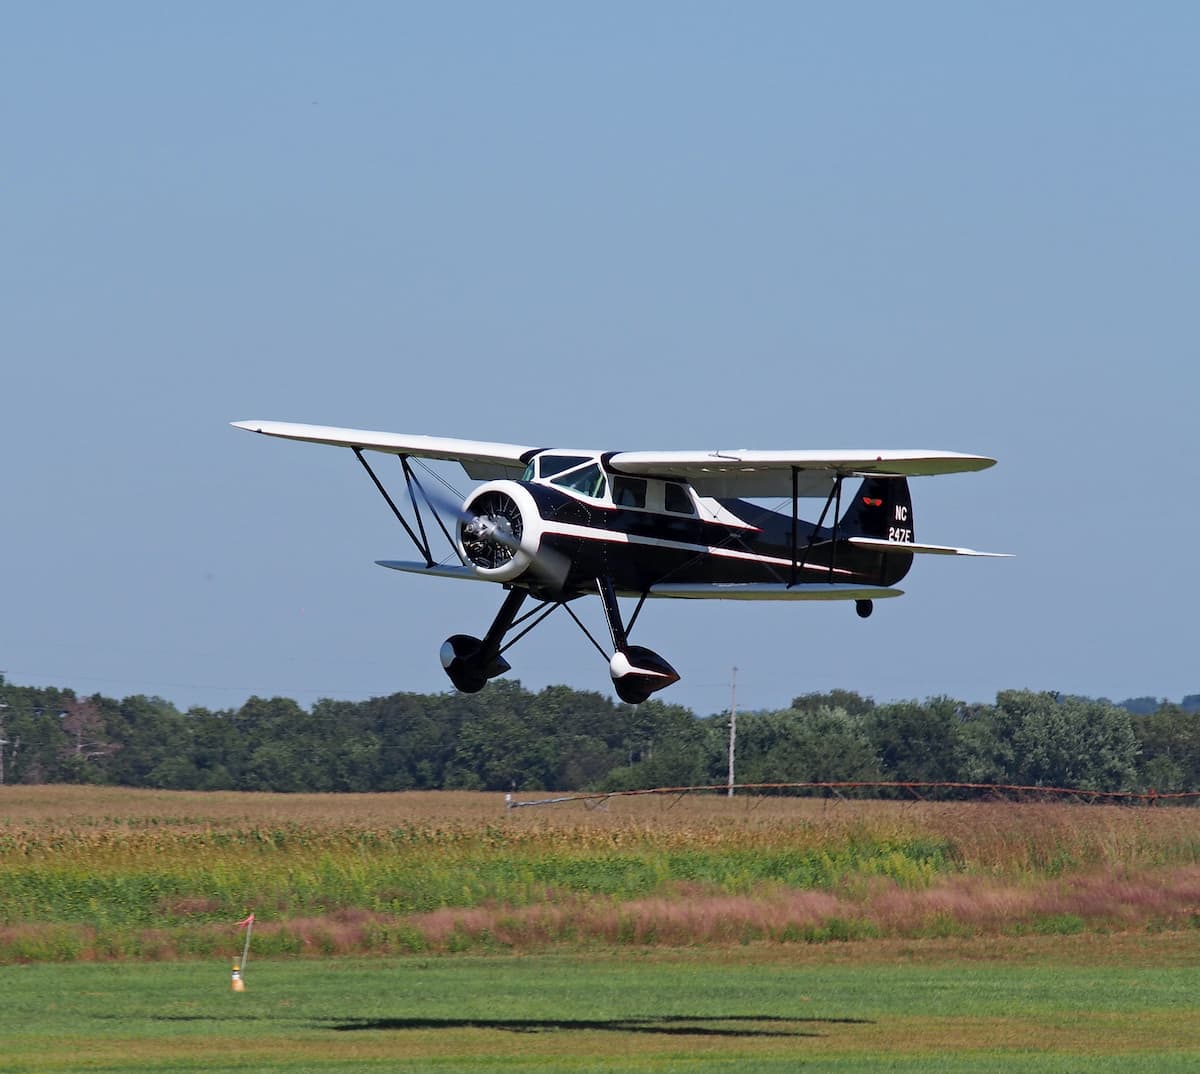  A fun and friendly grassroots fly-in — General Aviation News 